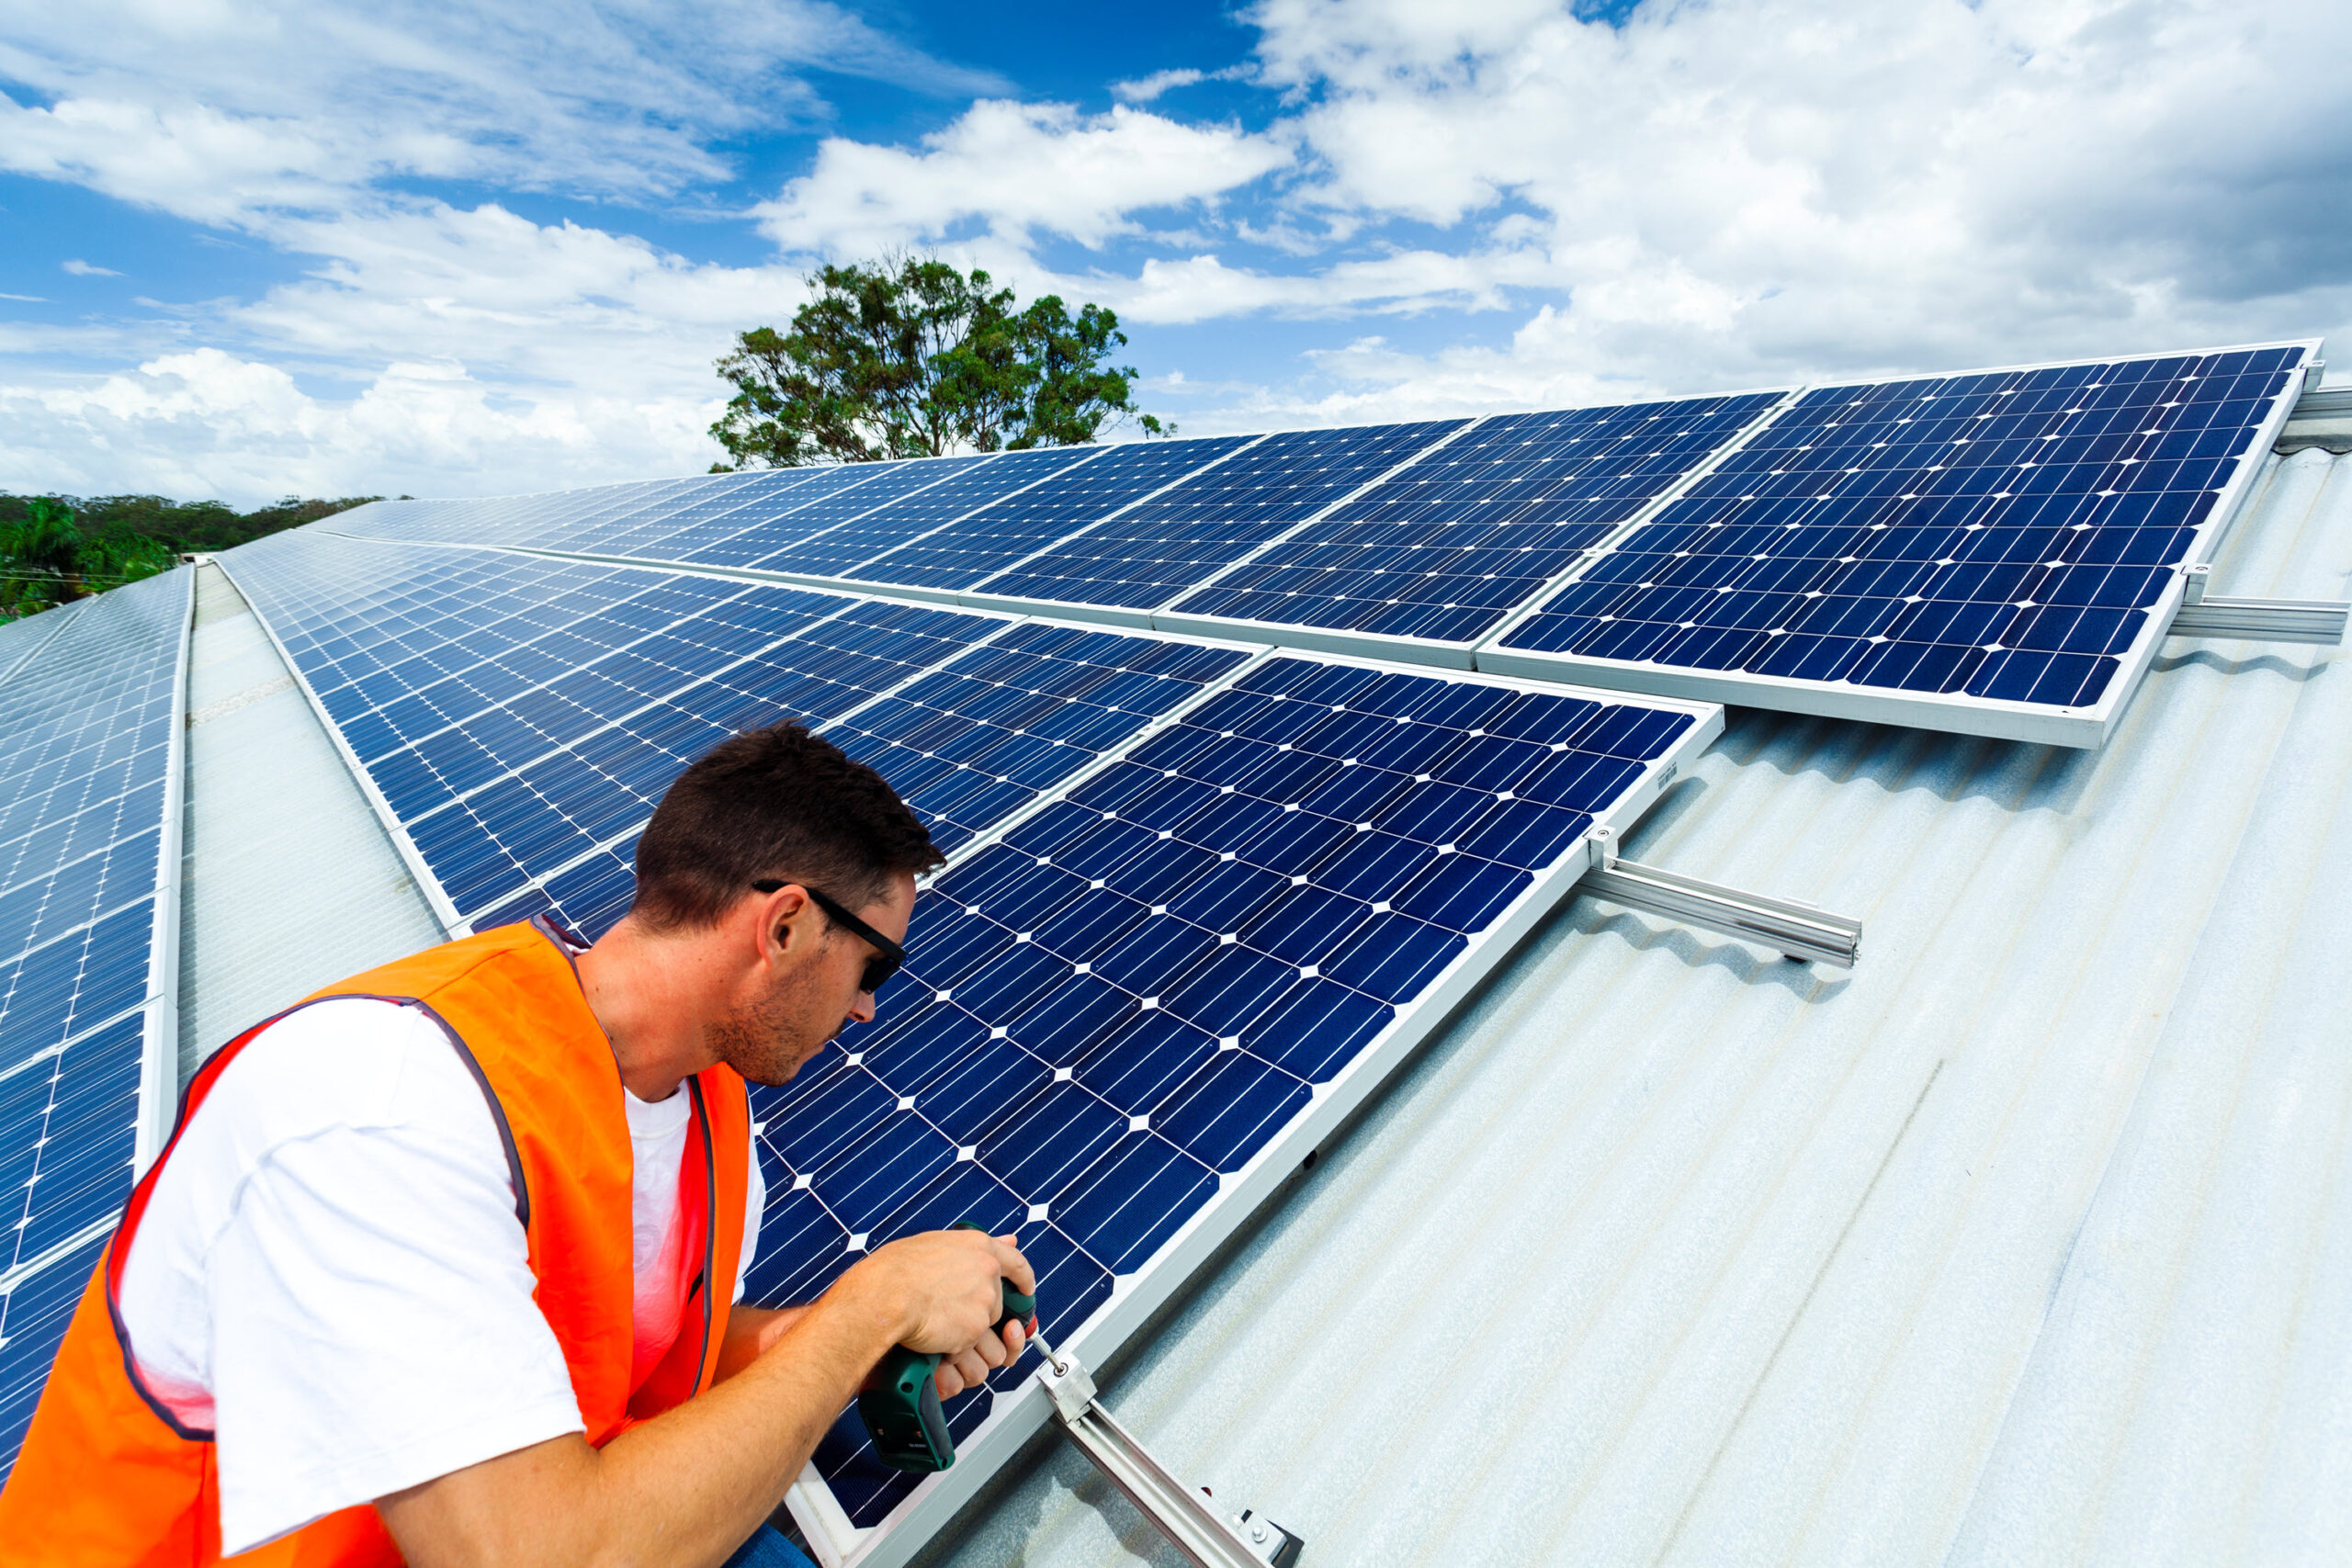 A worker on a roof maintaining a solar panel system